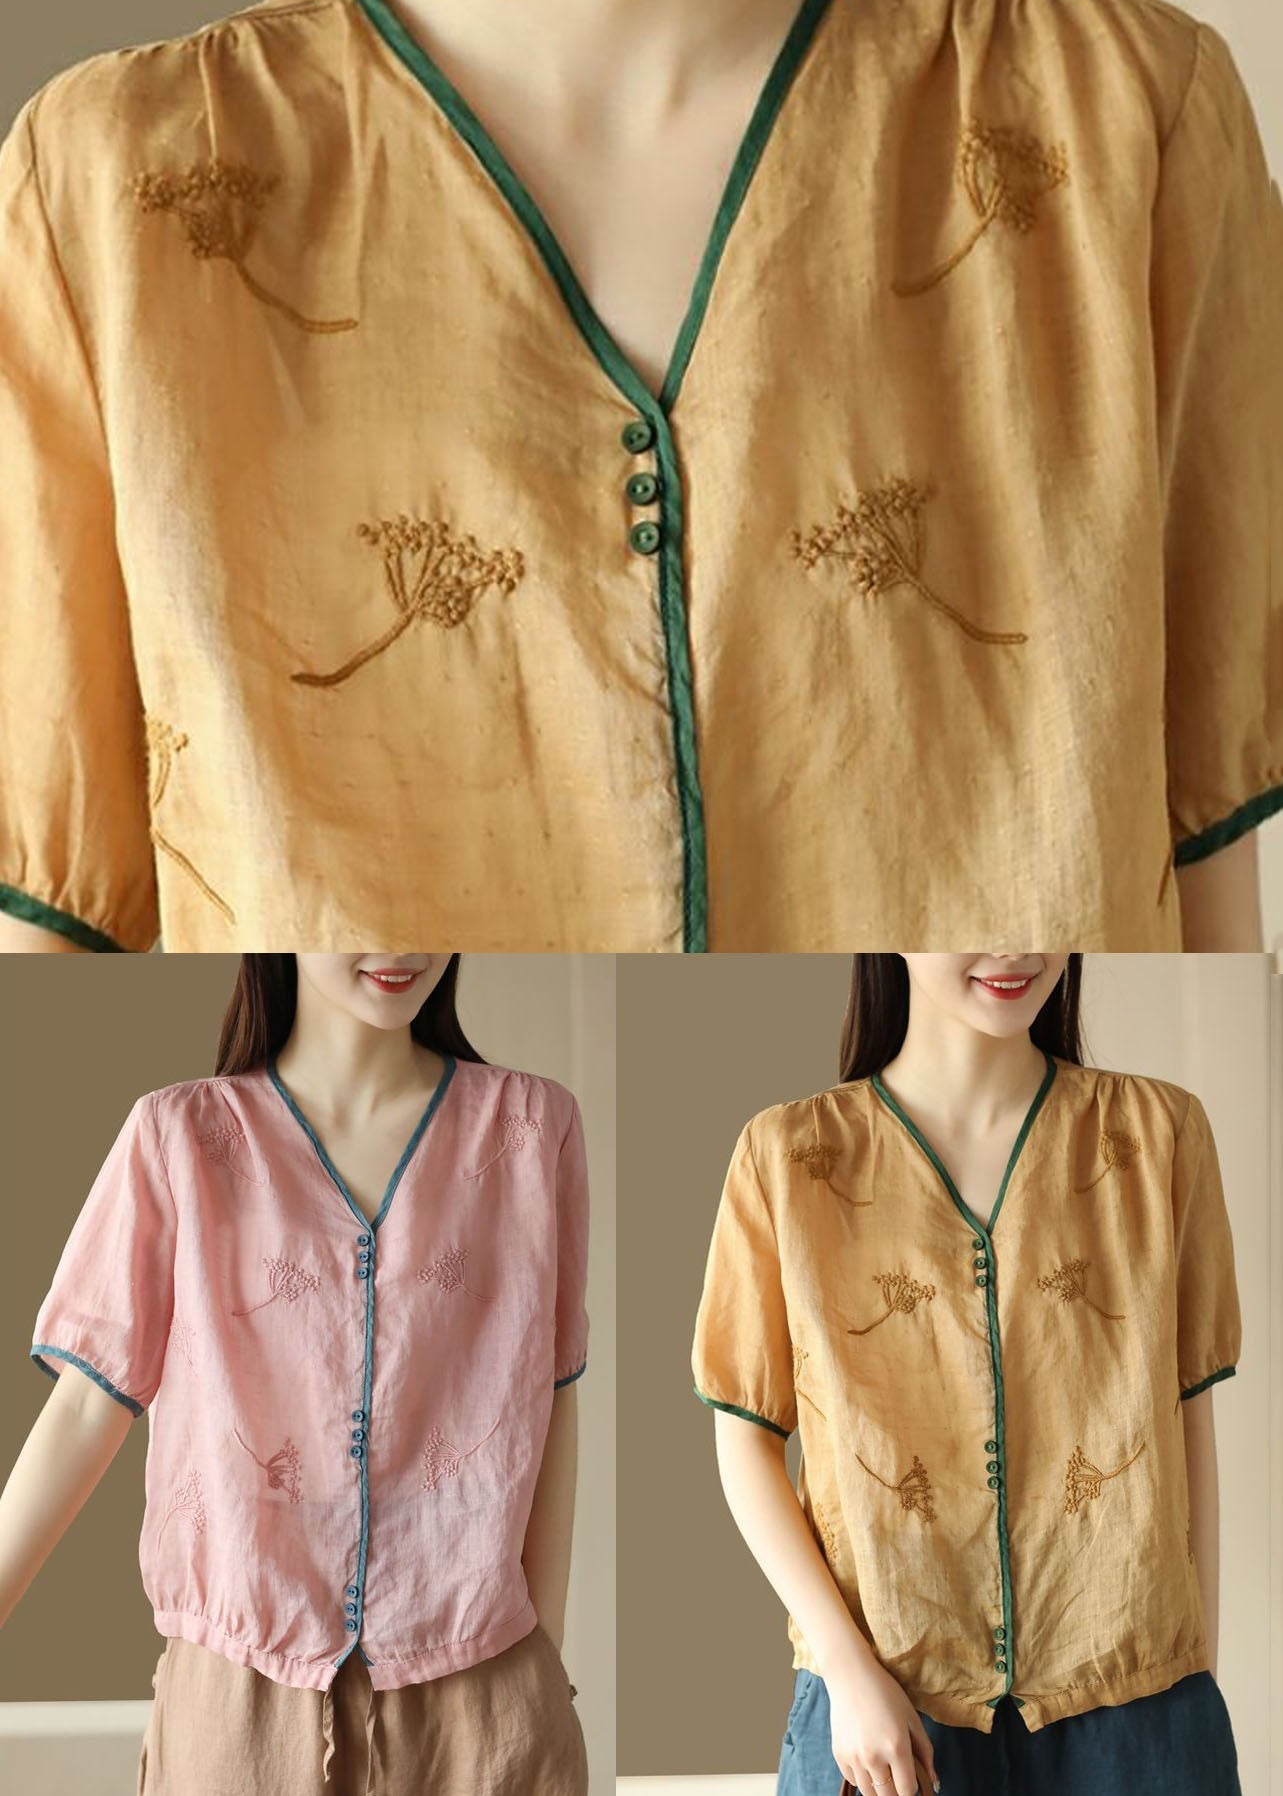 Vintage Yellow V Neck Embroideried Patchwork Linen Top Summer LY4018 - fabuloryshop